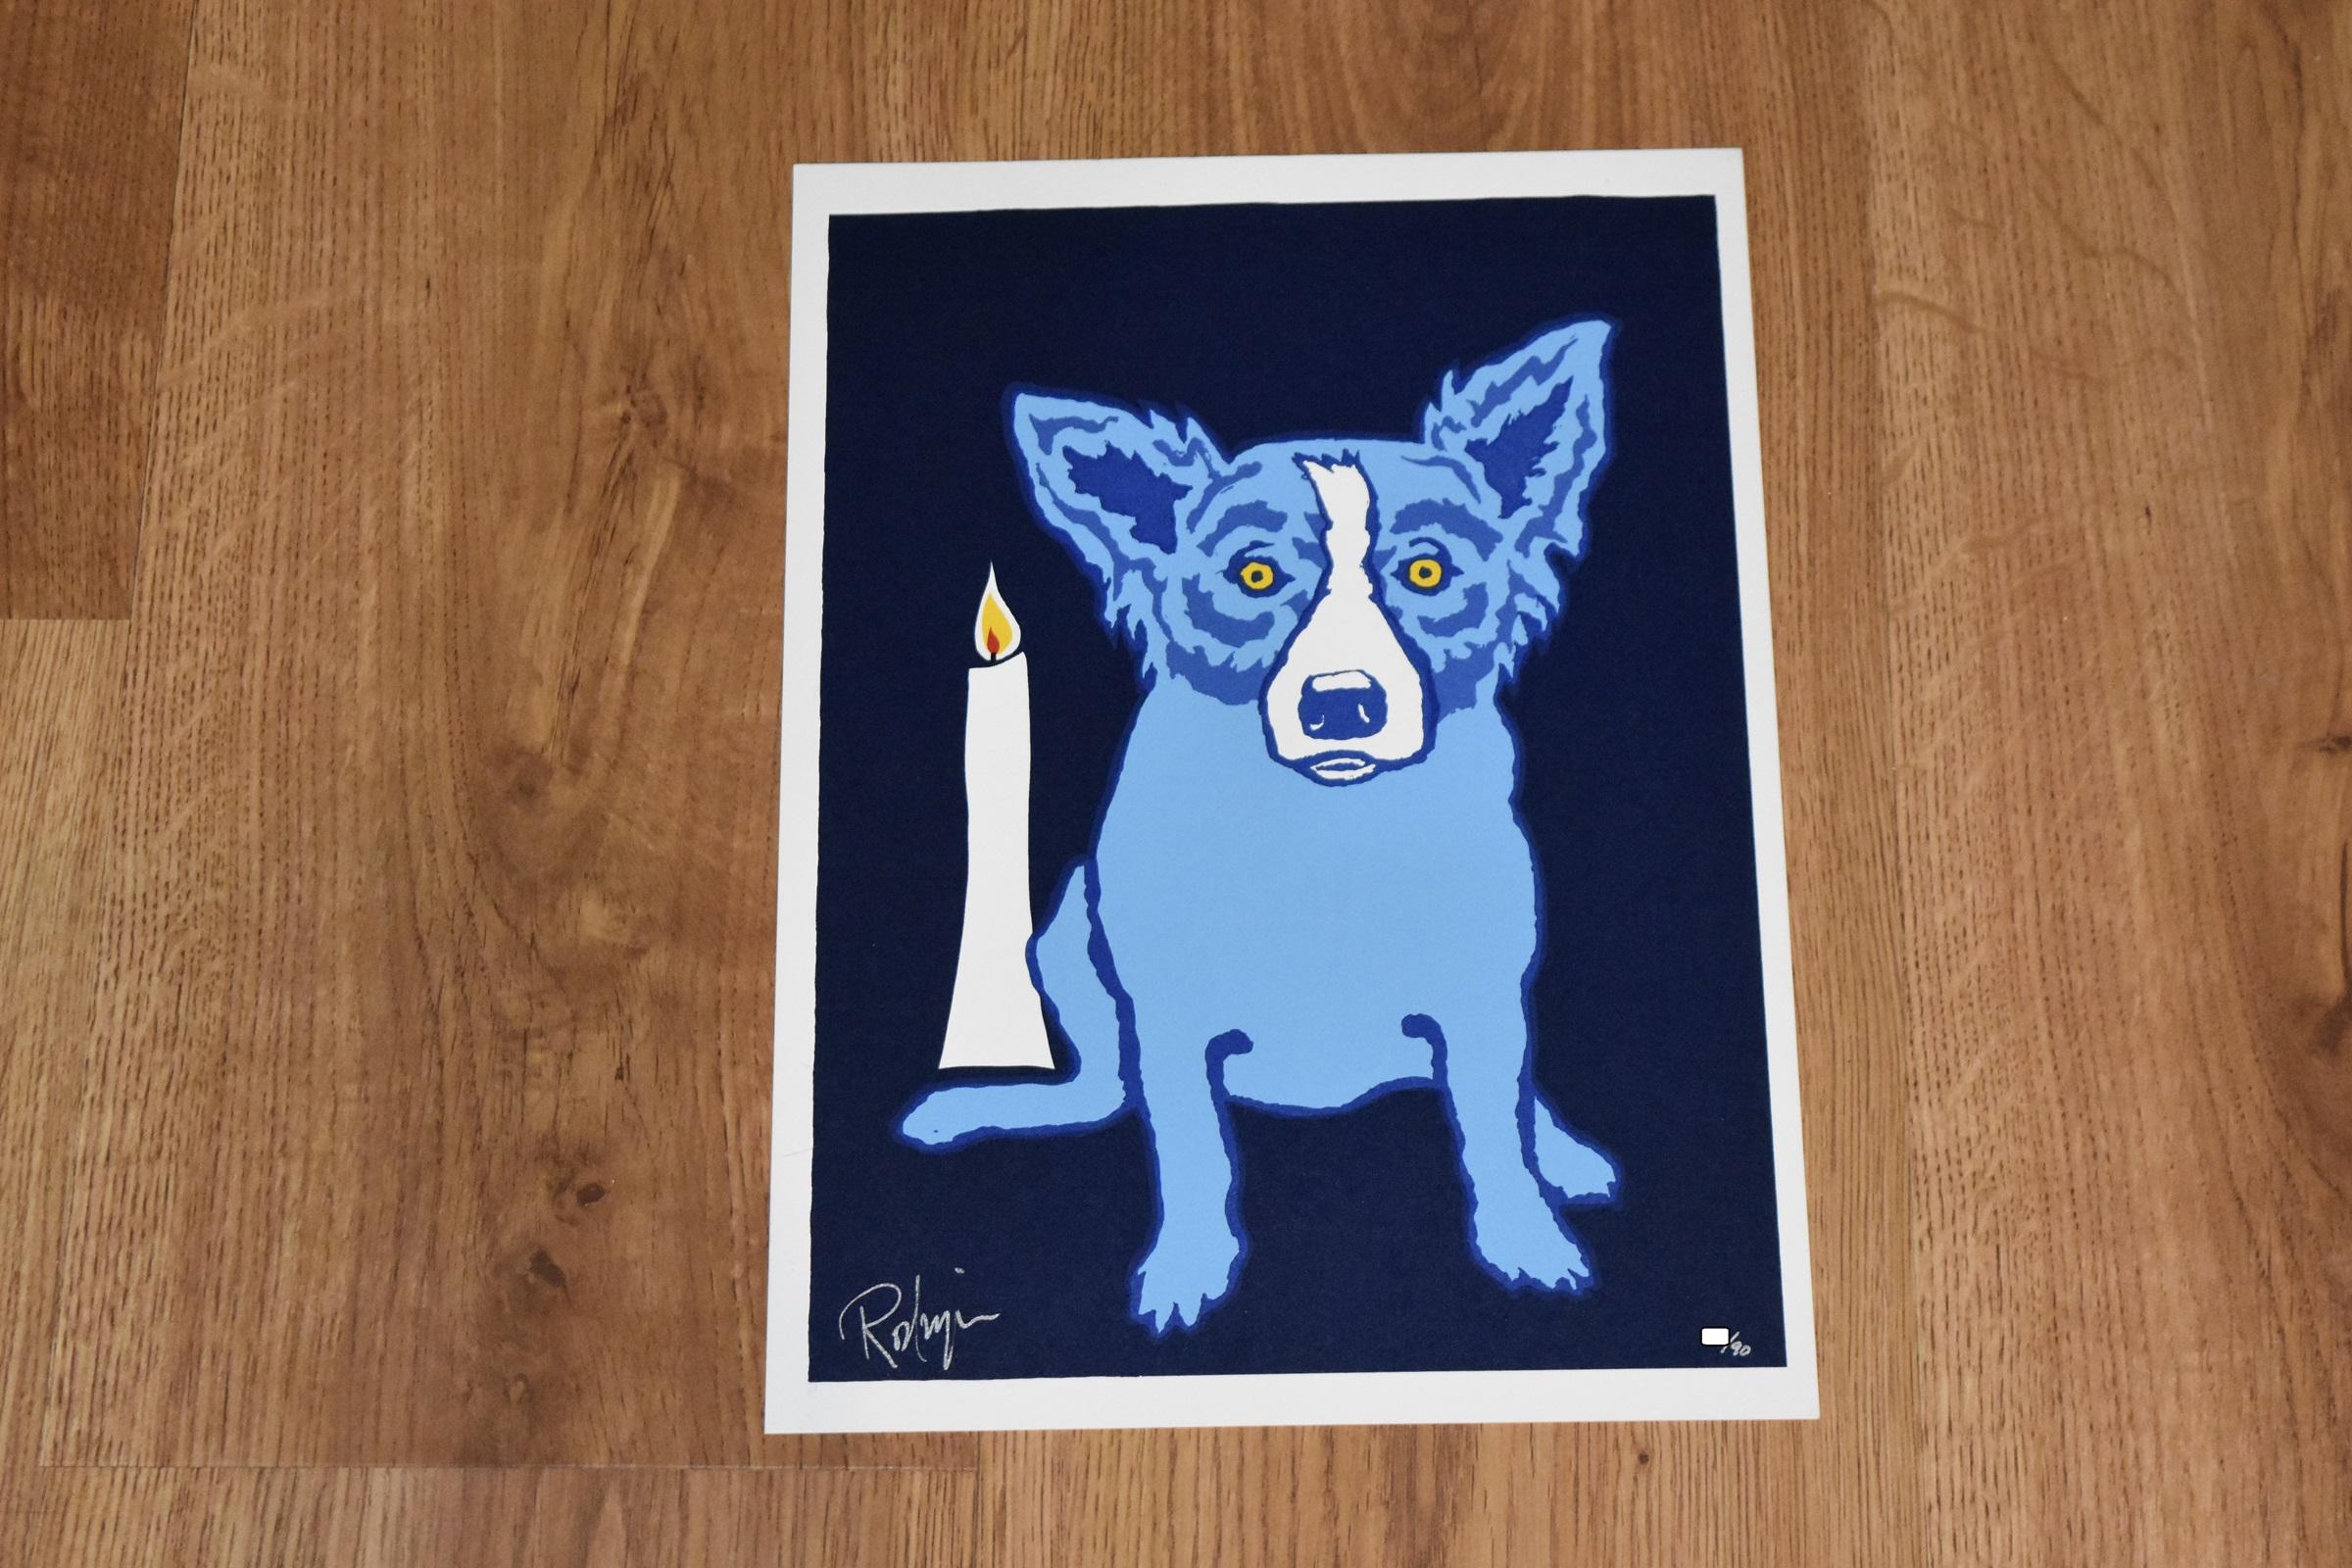 This Blue Dog work consists of one blue dog centered sitting on a black background with a single lit white candle to its side. The dog has soulful yellow eyes.  This pop art animal original silkscreen print on paper is hand signed by the